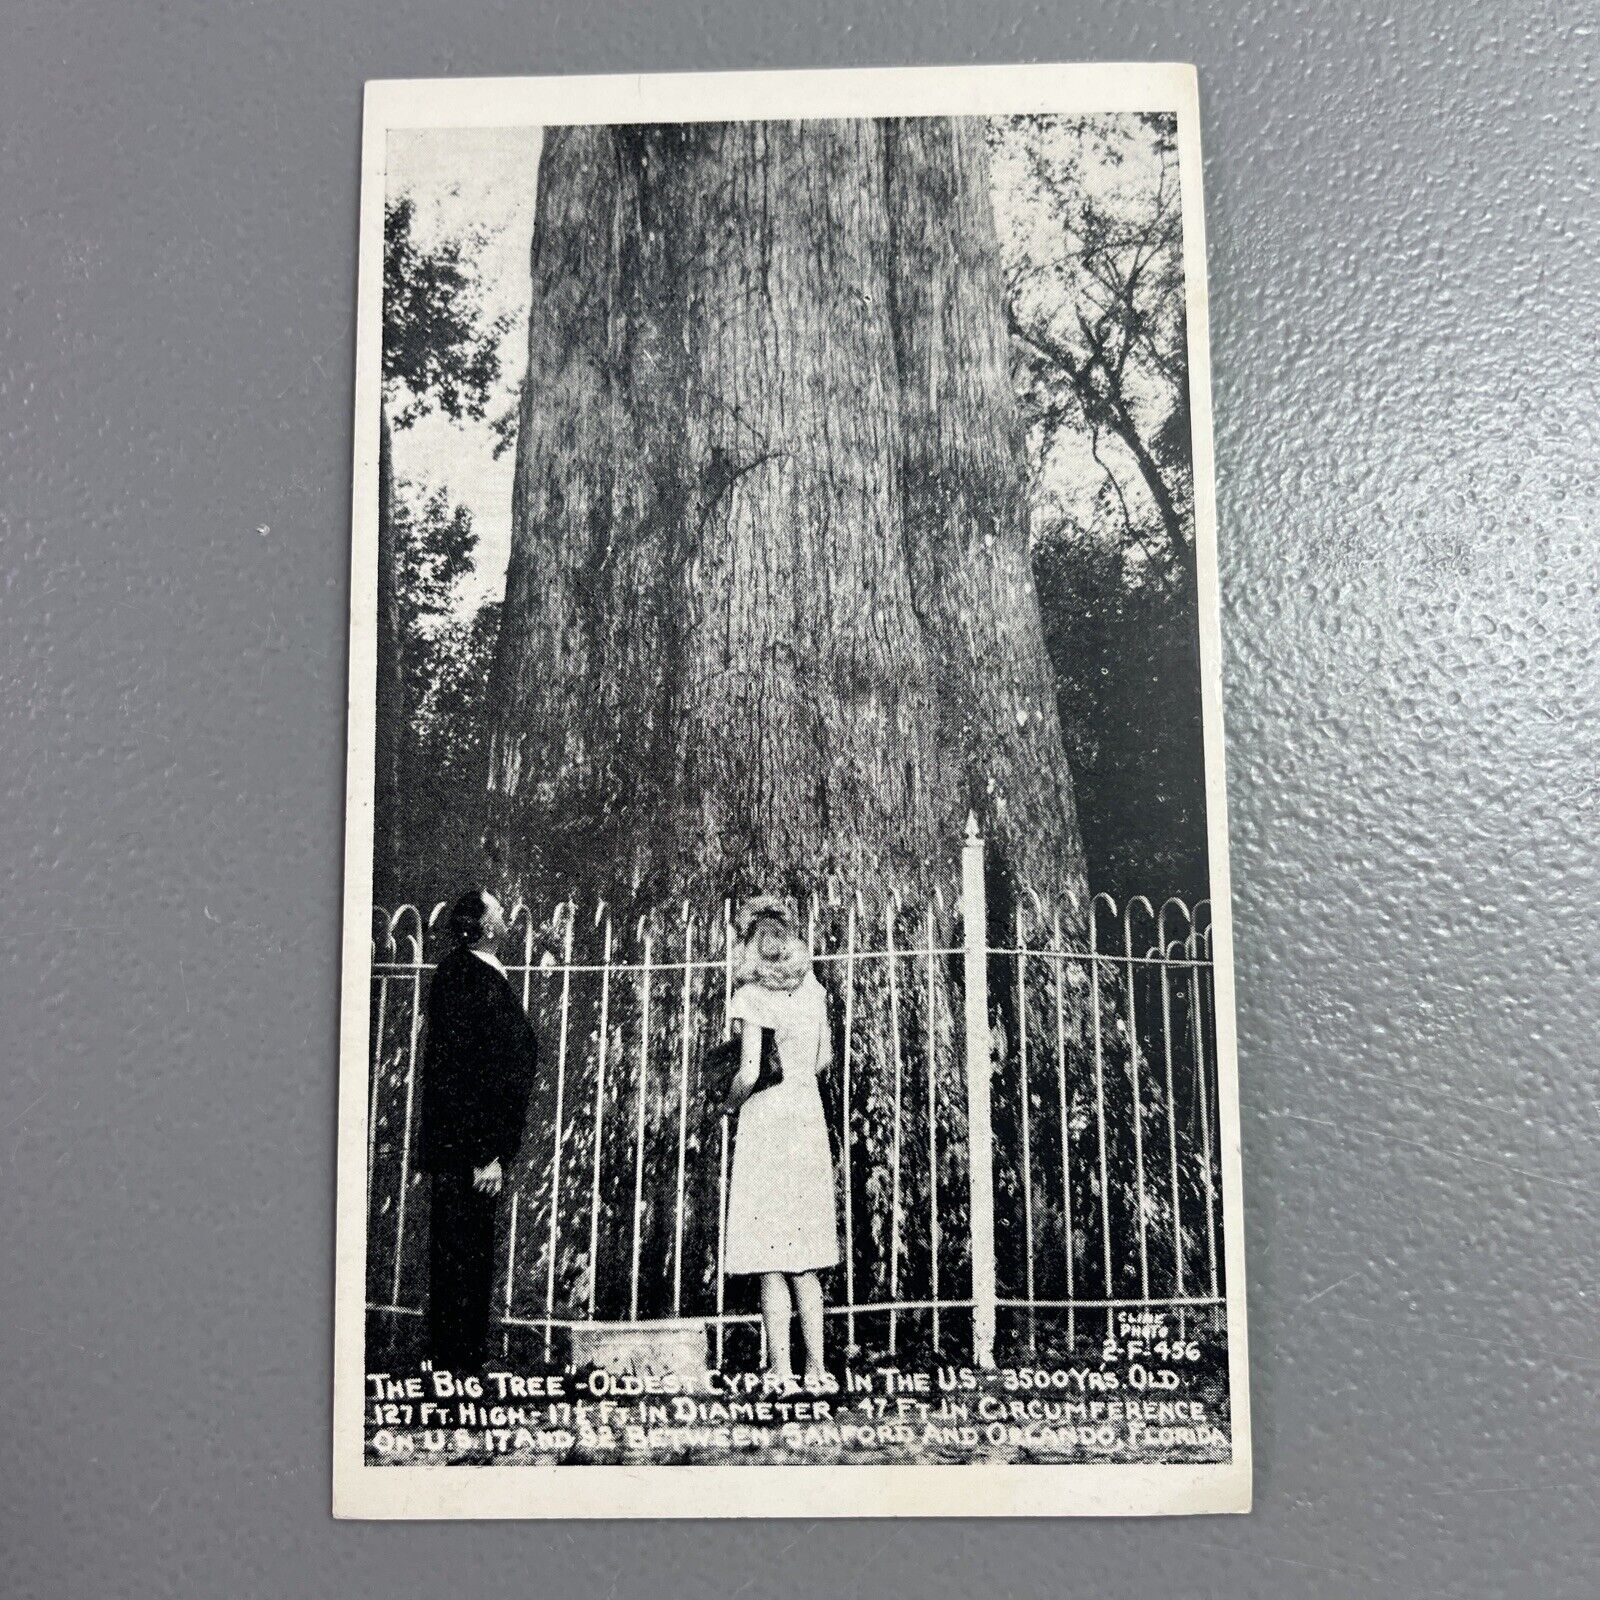 RPPC Vintage Postcard - The Big Tree - Oldest Cypress in the US 3,500 - Unposted